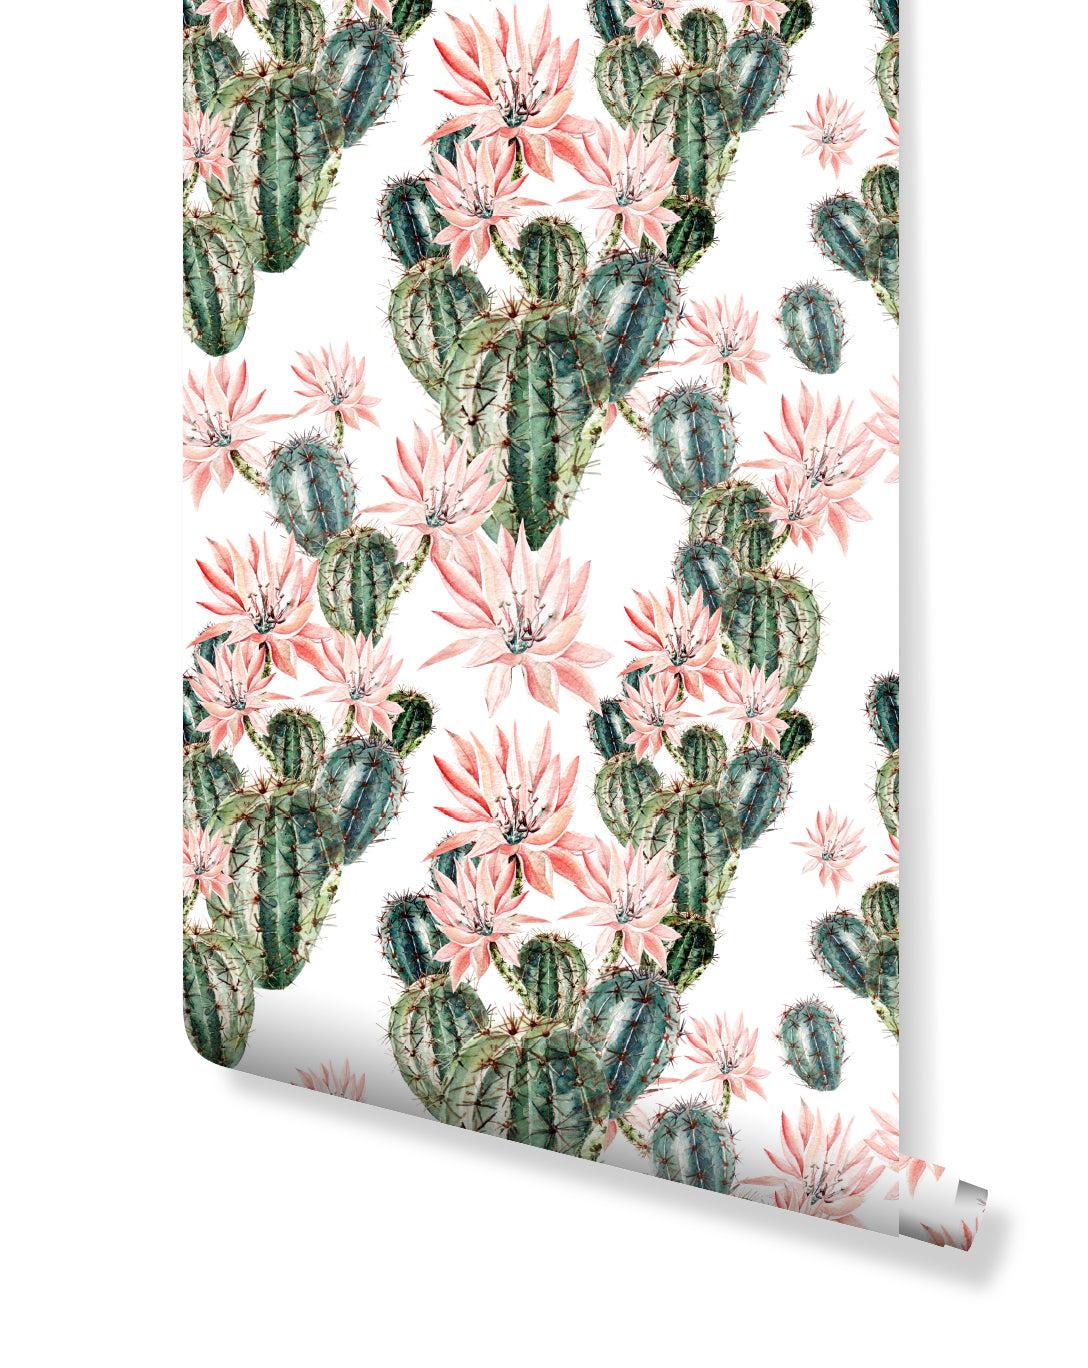 Cactus Temporary Wallpaper Floral Removable Peel and Stick Wall Decal with Colorful Flowers Succulents Cacti Wall Art Sticker CC052